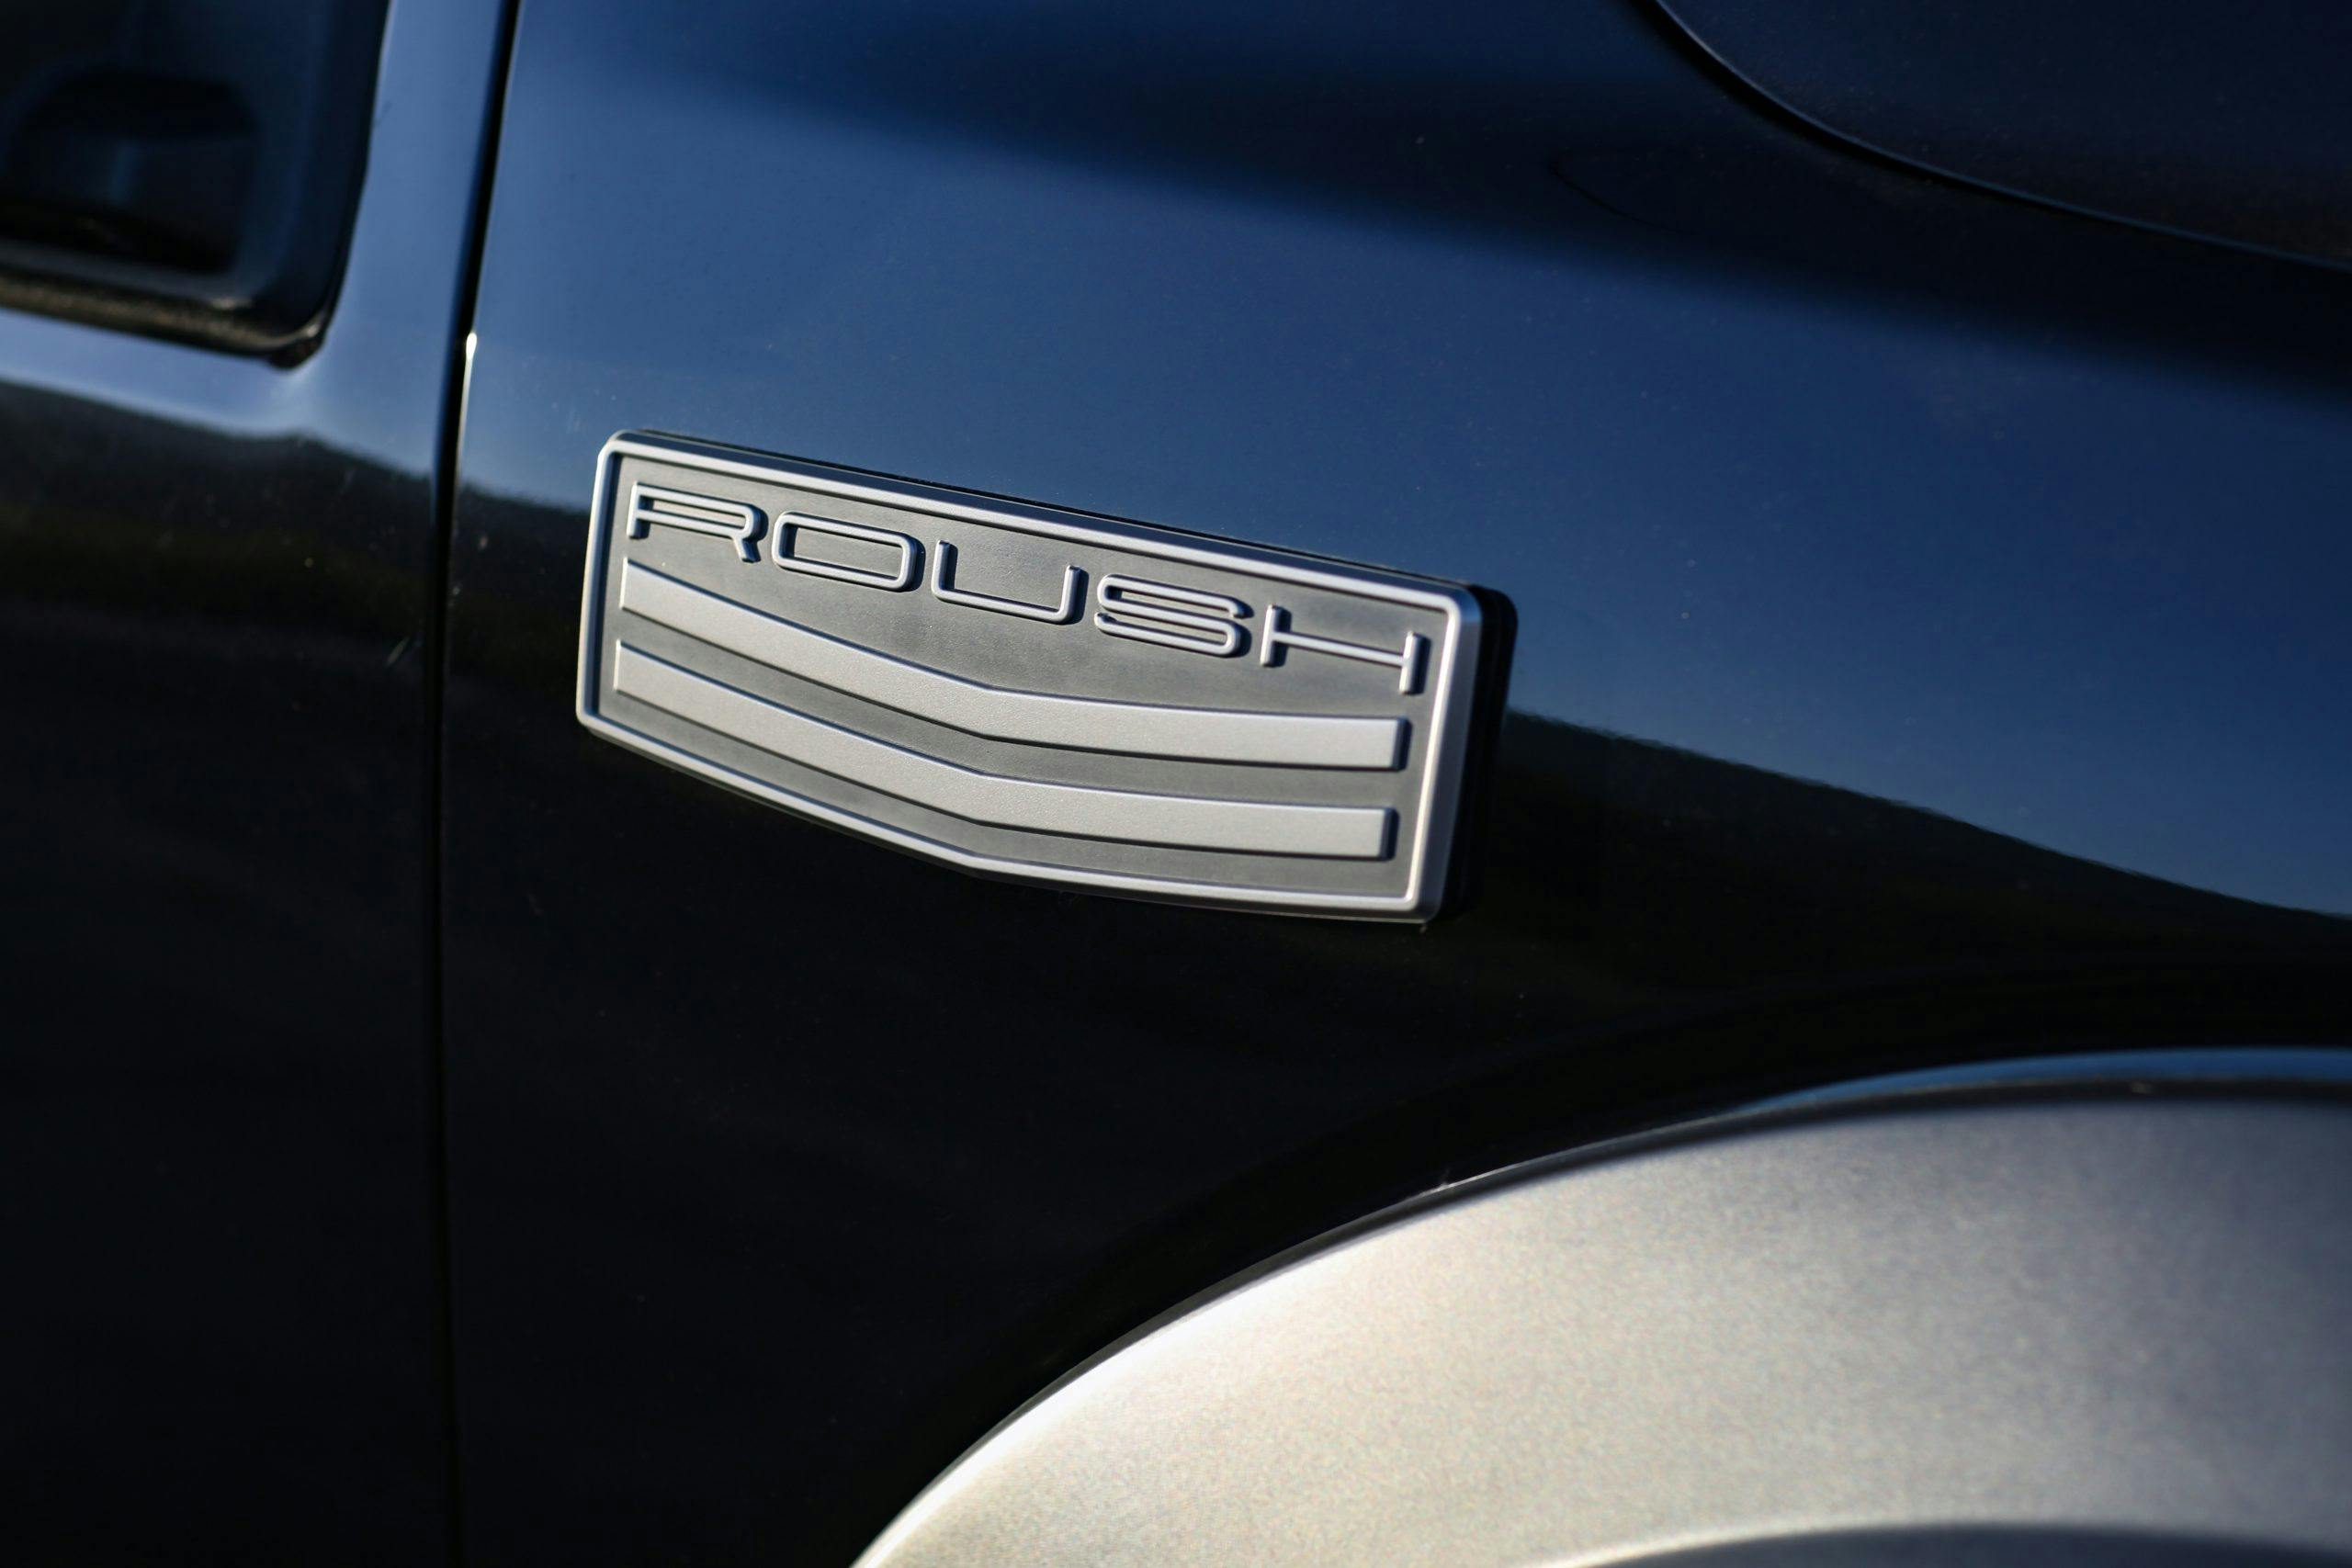 2020 F-150 Roush 5.11 Tactical Edition badge